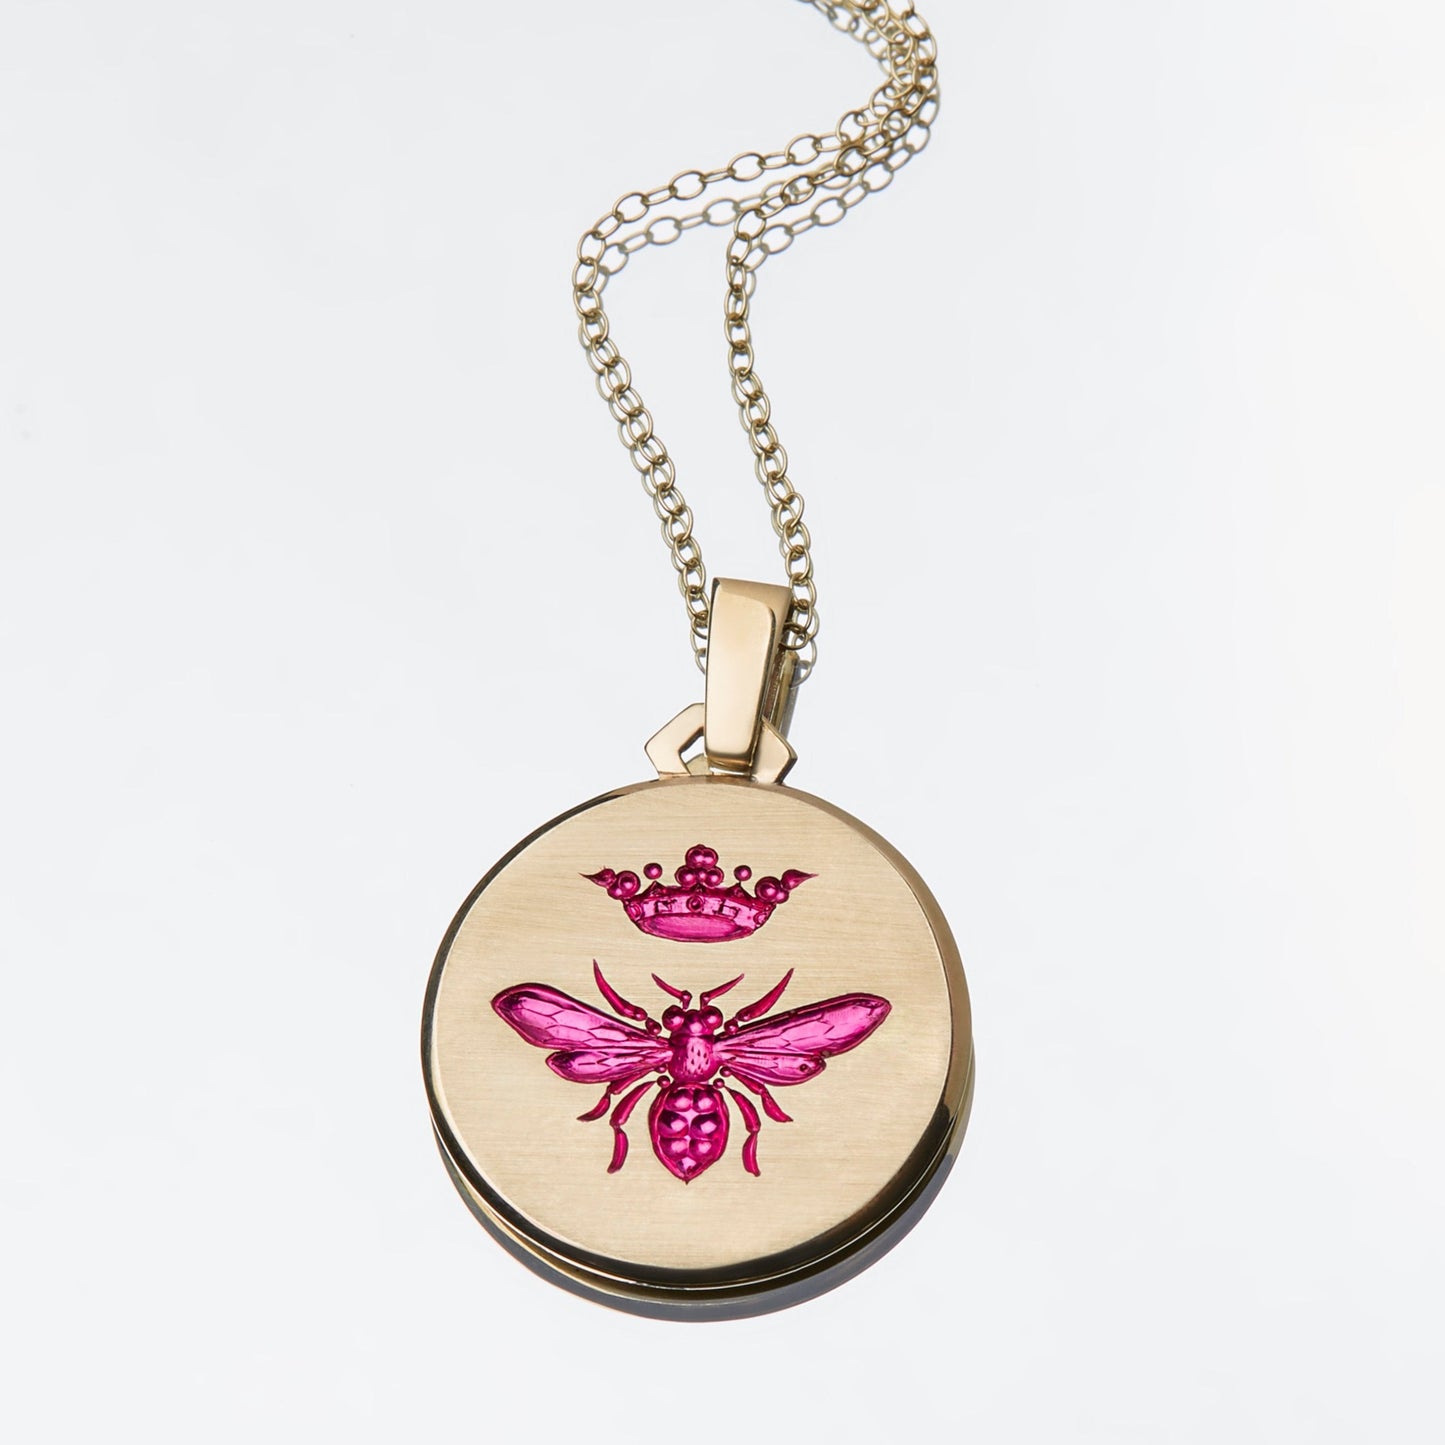 Queen Bee Pendant | Made to Order